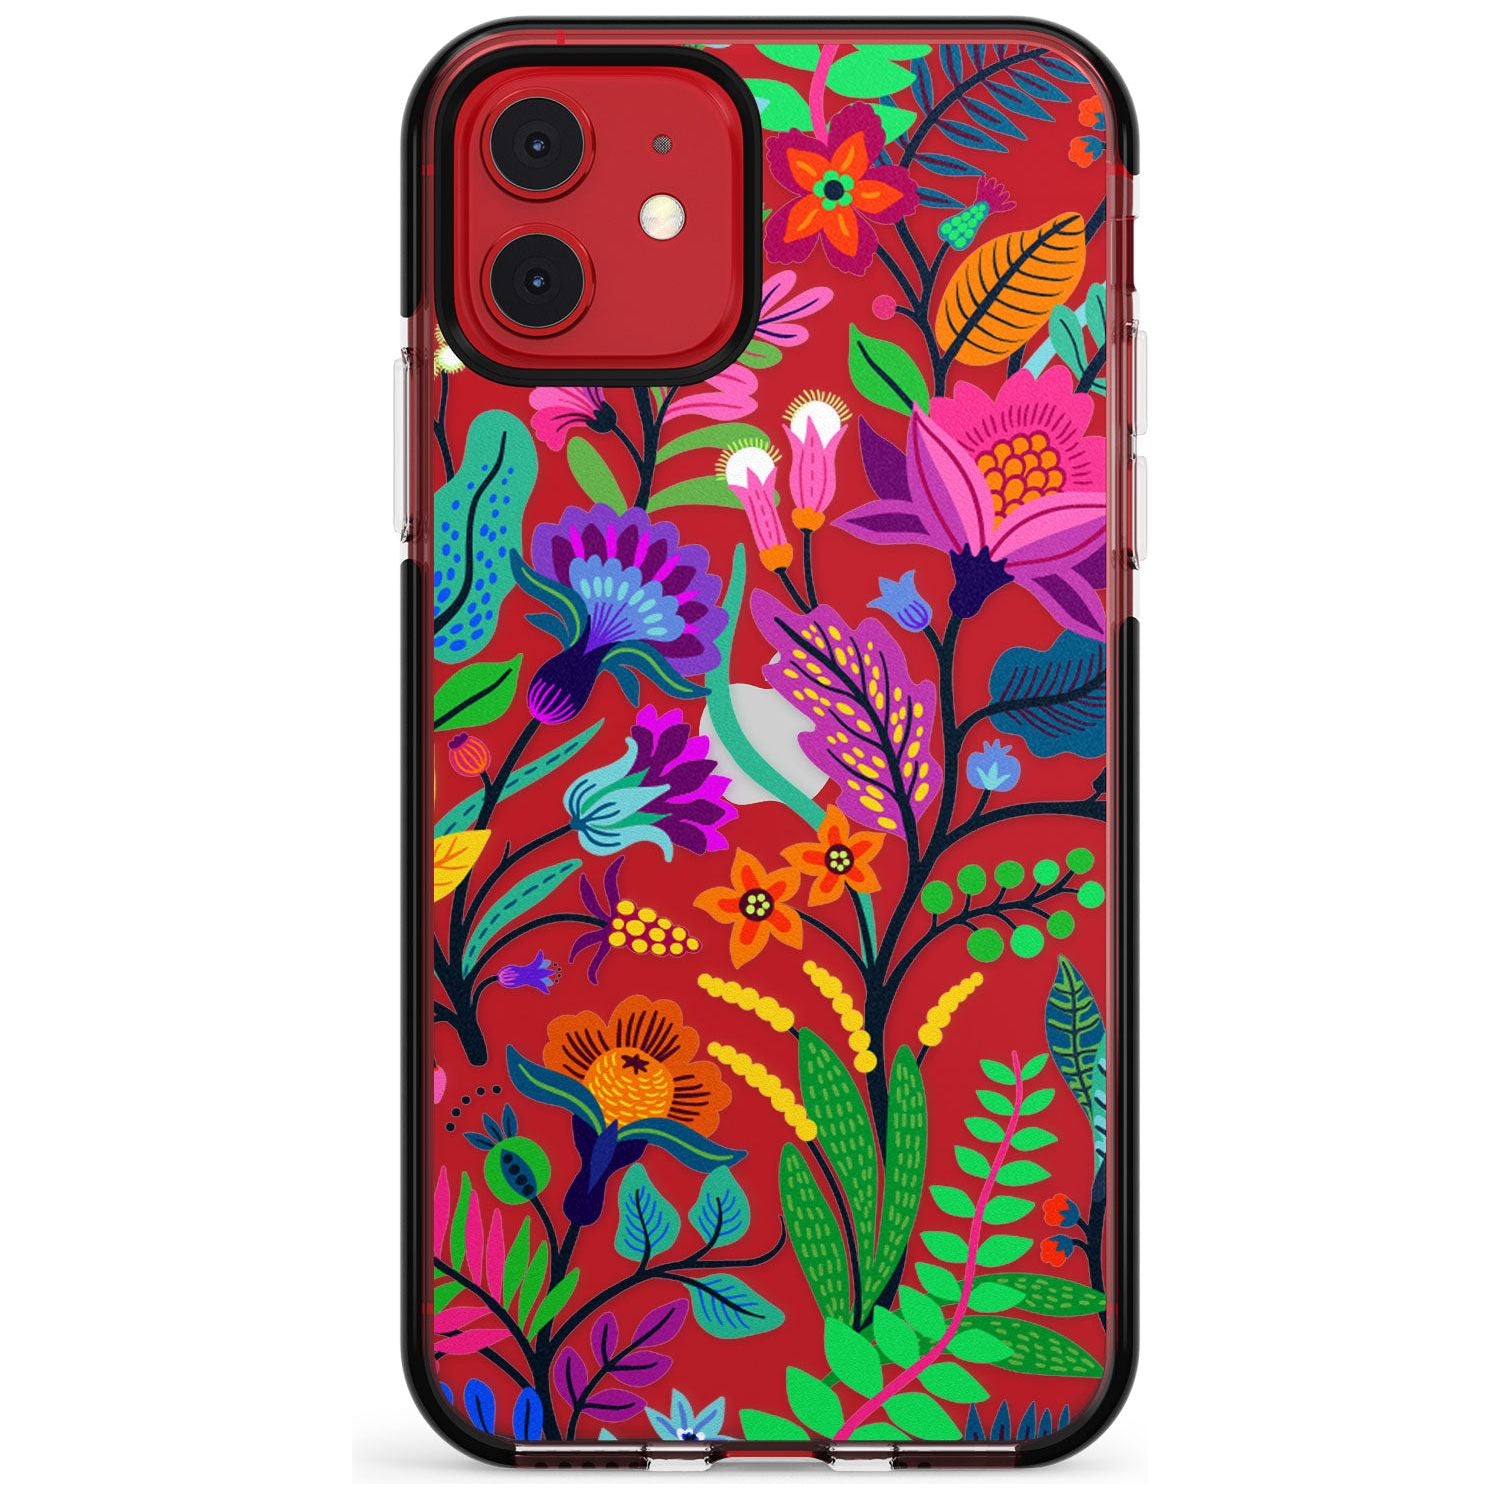 Floral Vibe Black Impact Phone Case for iPhone 11 Pro Max